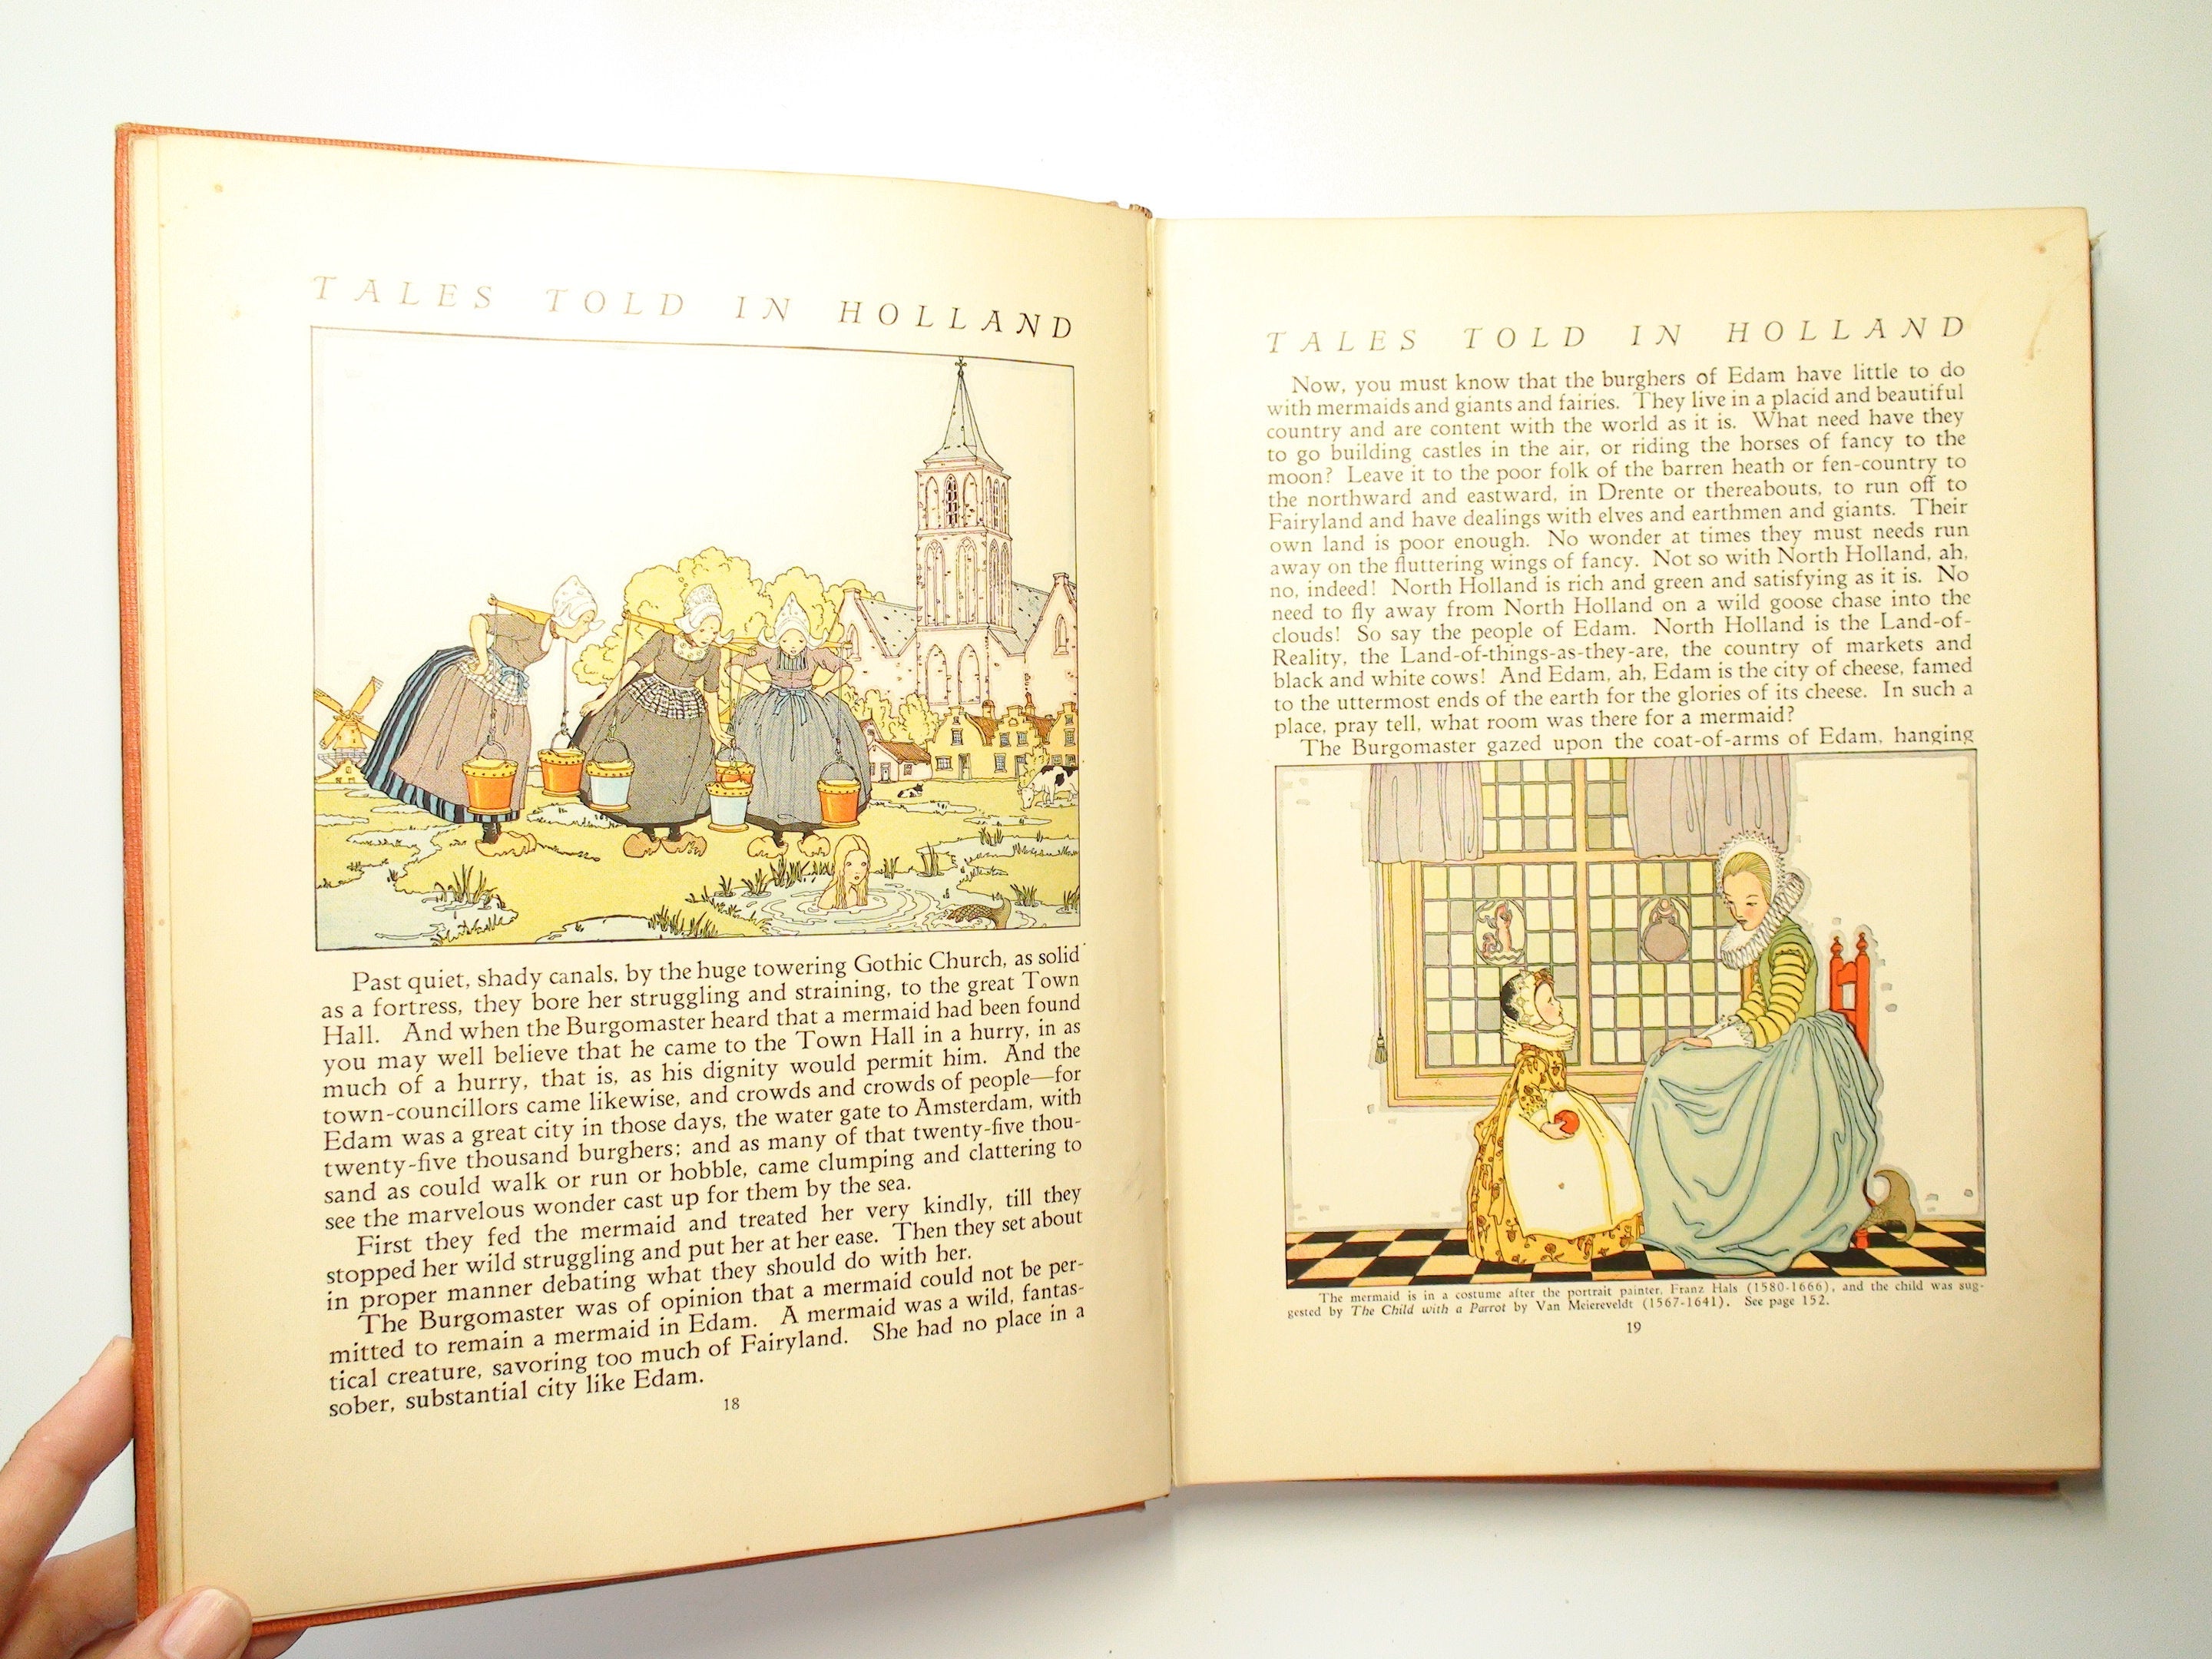 Tales Told in Holland, Olive Beaupre Miller, Illustrated, 1st Ed, 1926